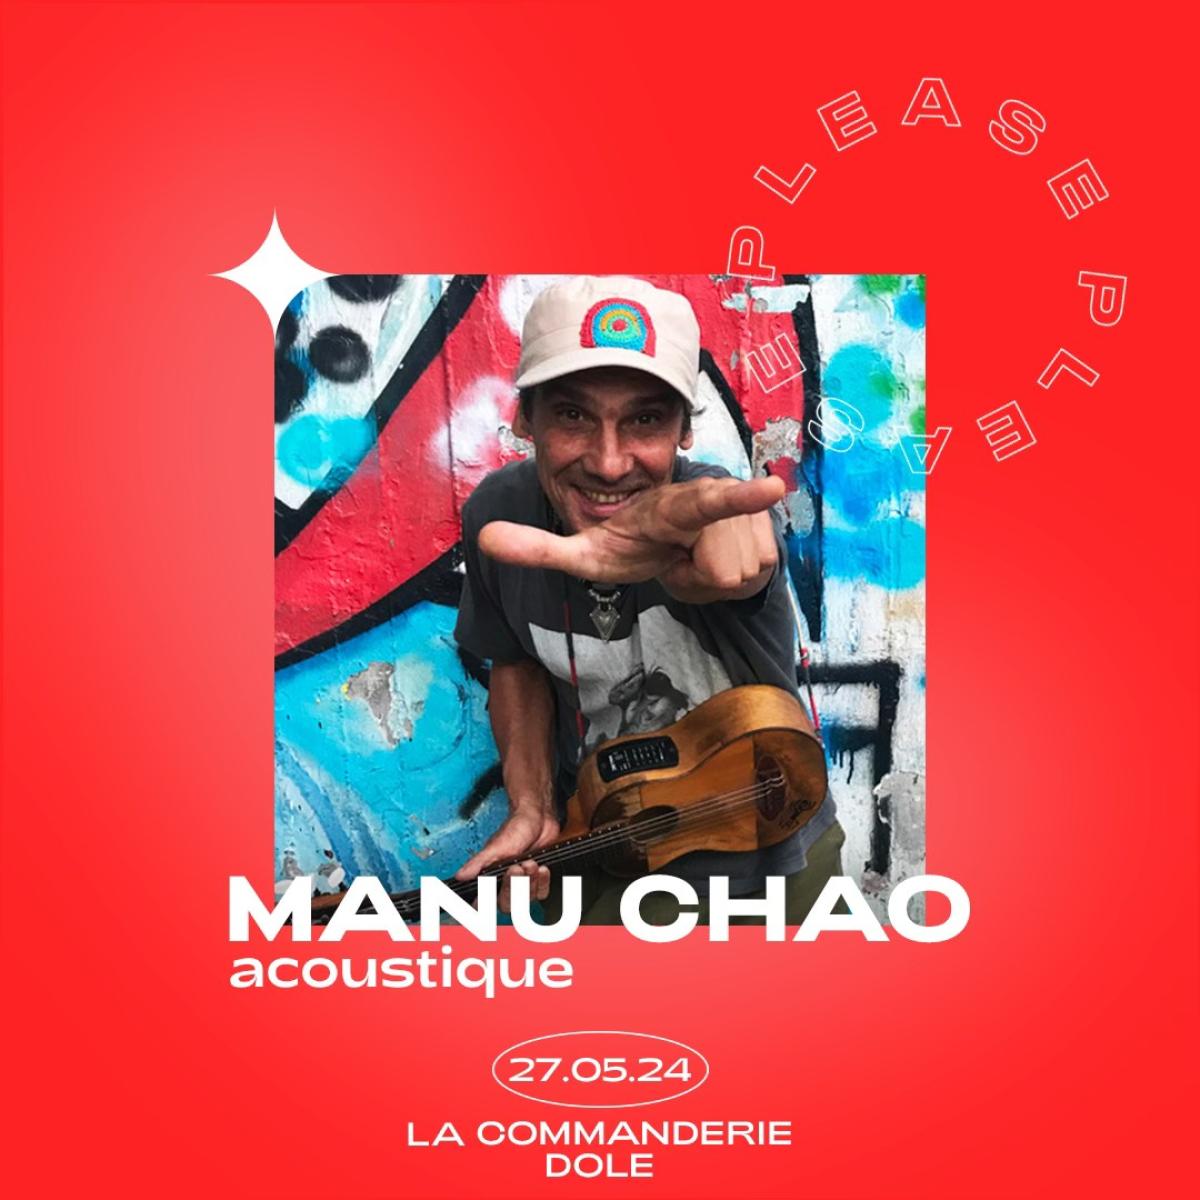 Manu Chao at La Commanderie Tickets